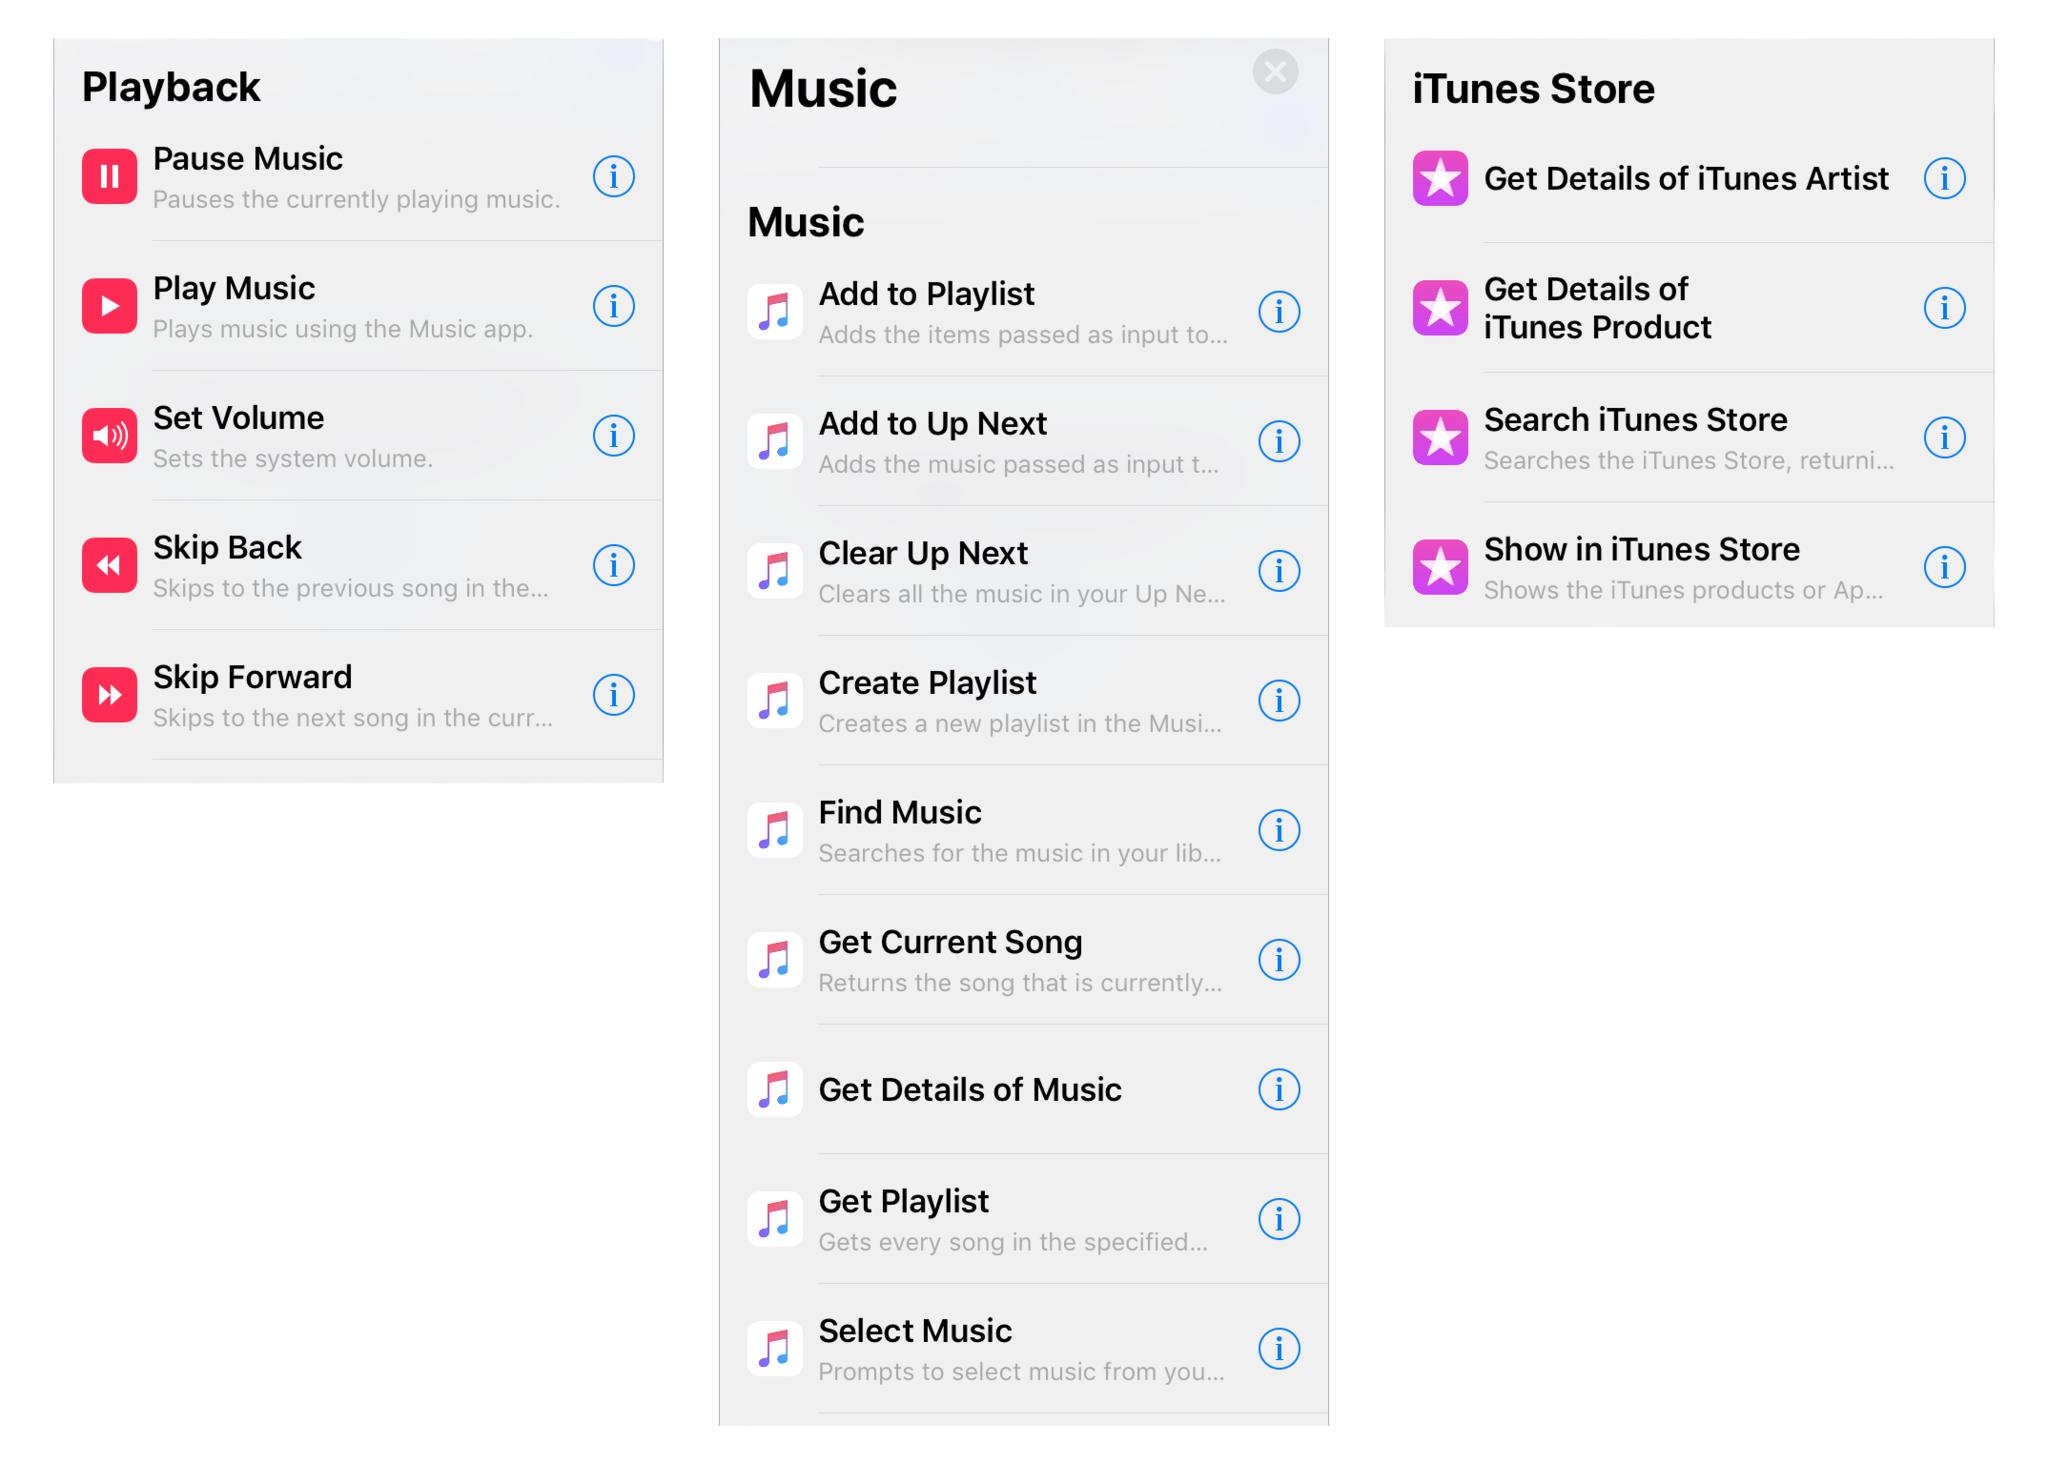 Image showing clipped screenshots of Shortcuts actions, including the Playback, Music, and iTunes categories